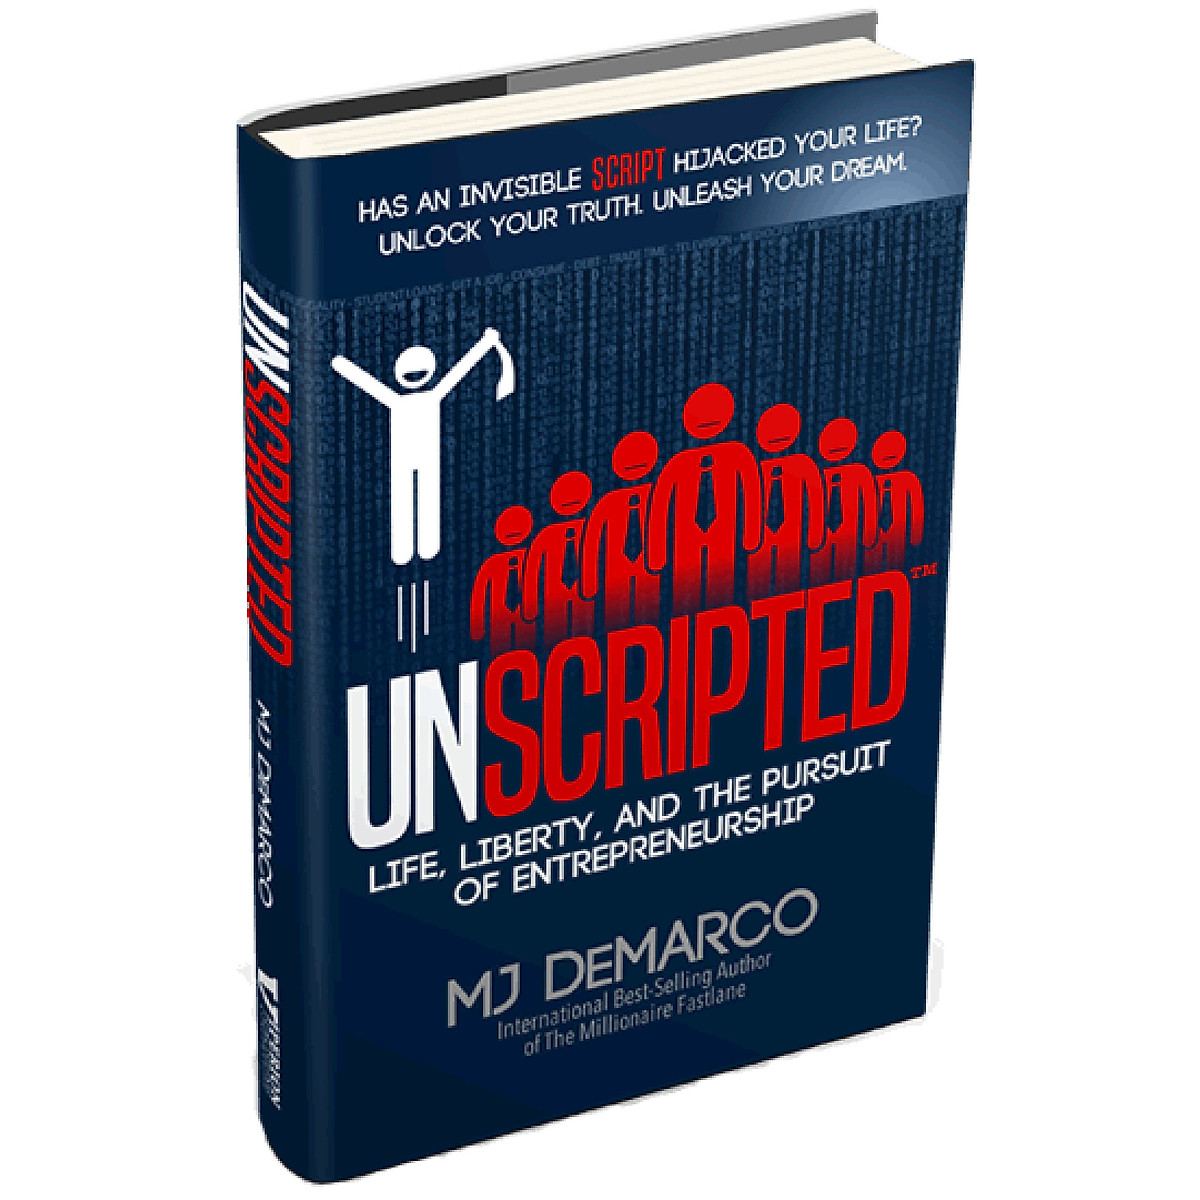  Unscripted: Life, Liberty, and the Pursuit of Entrepreneurship